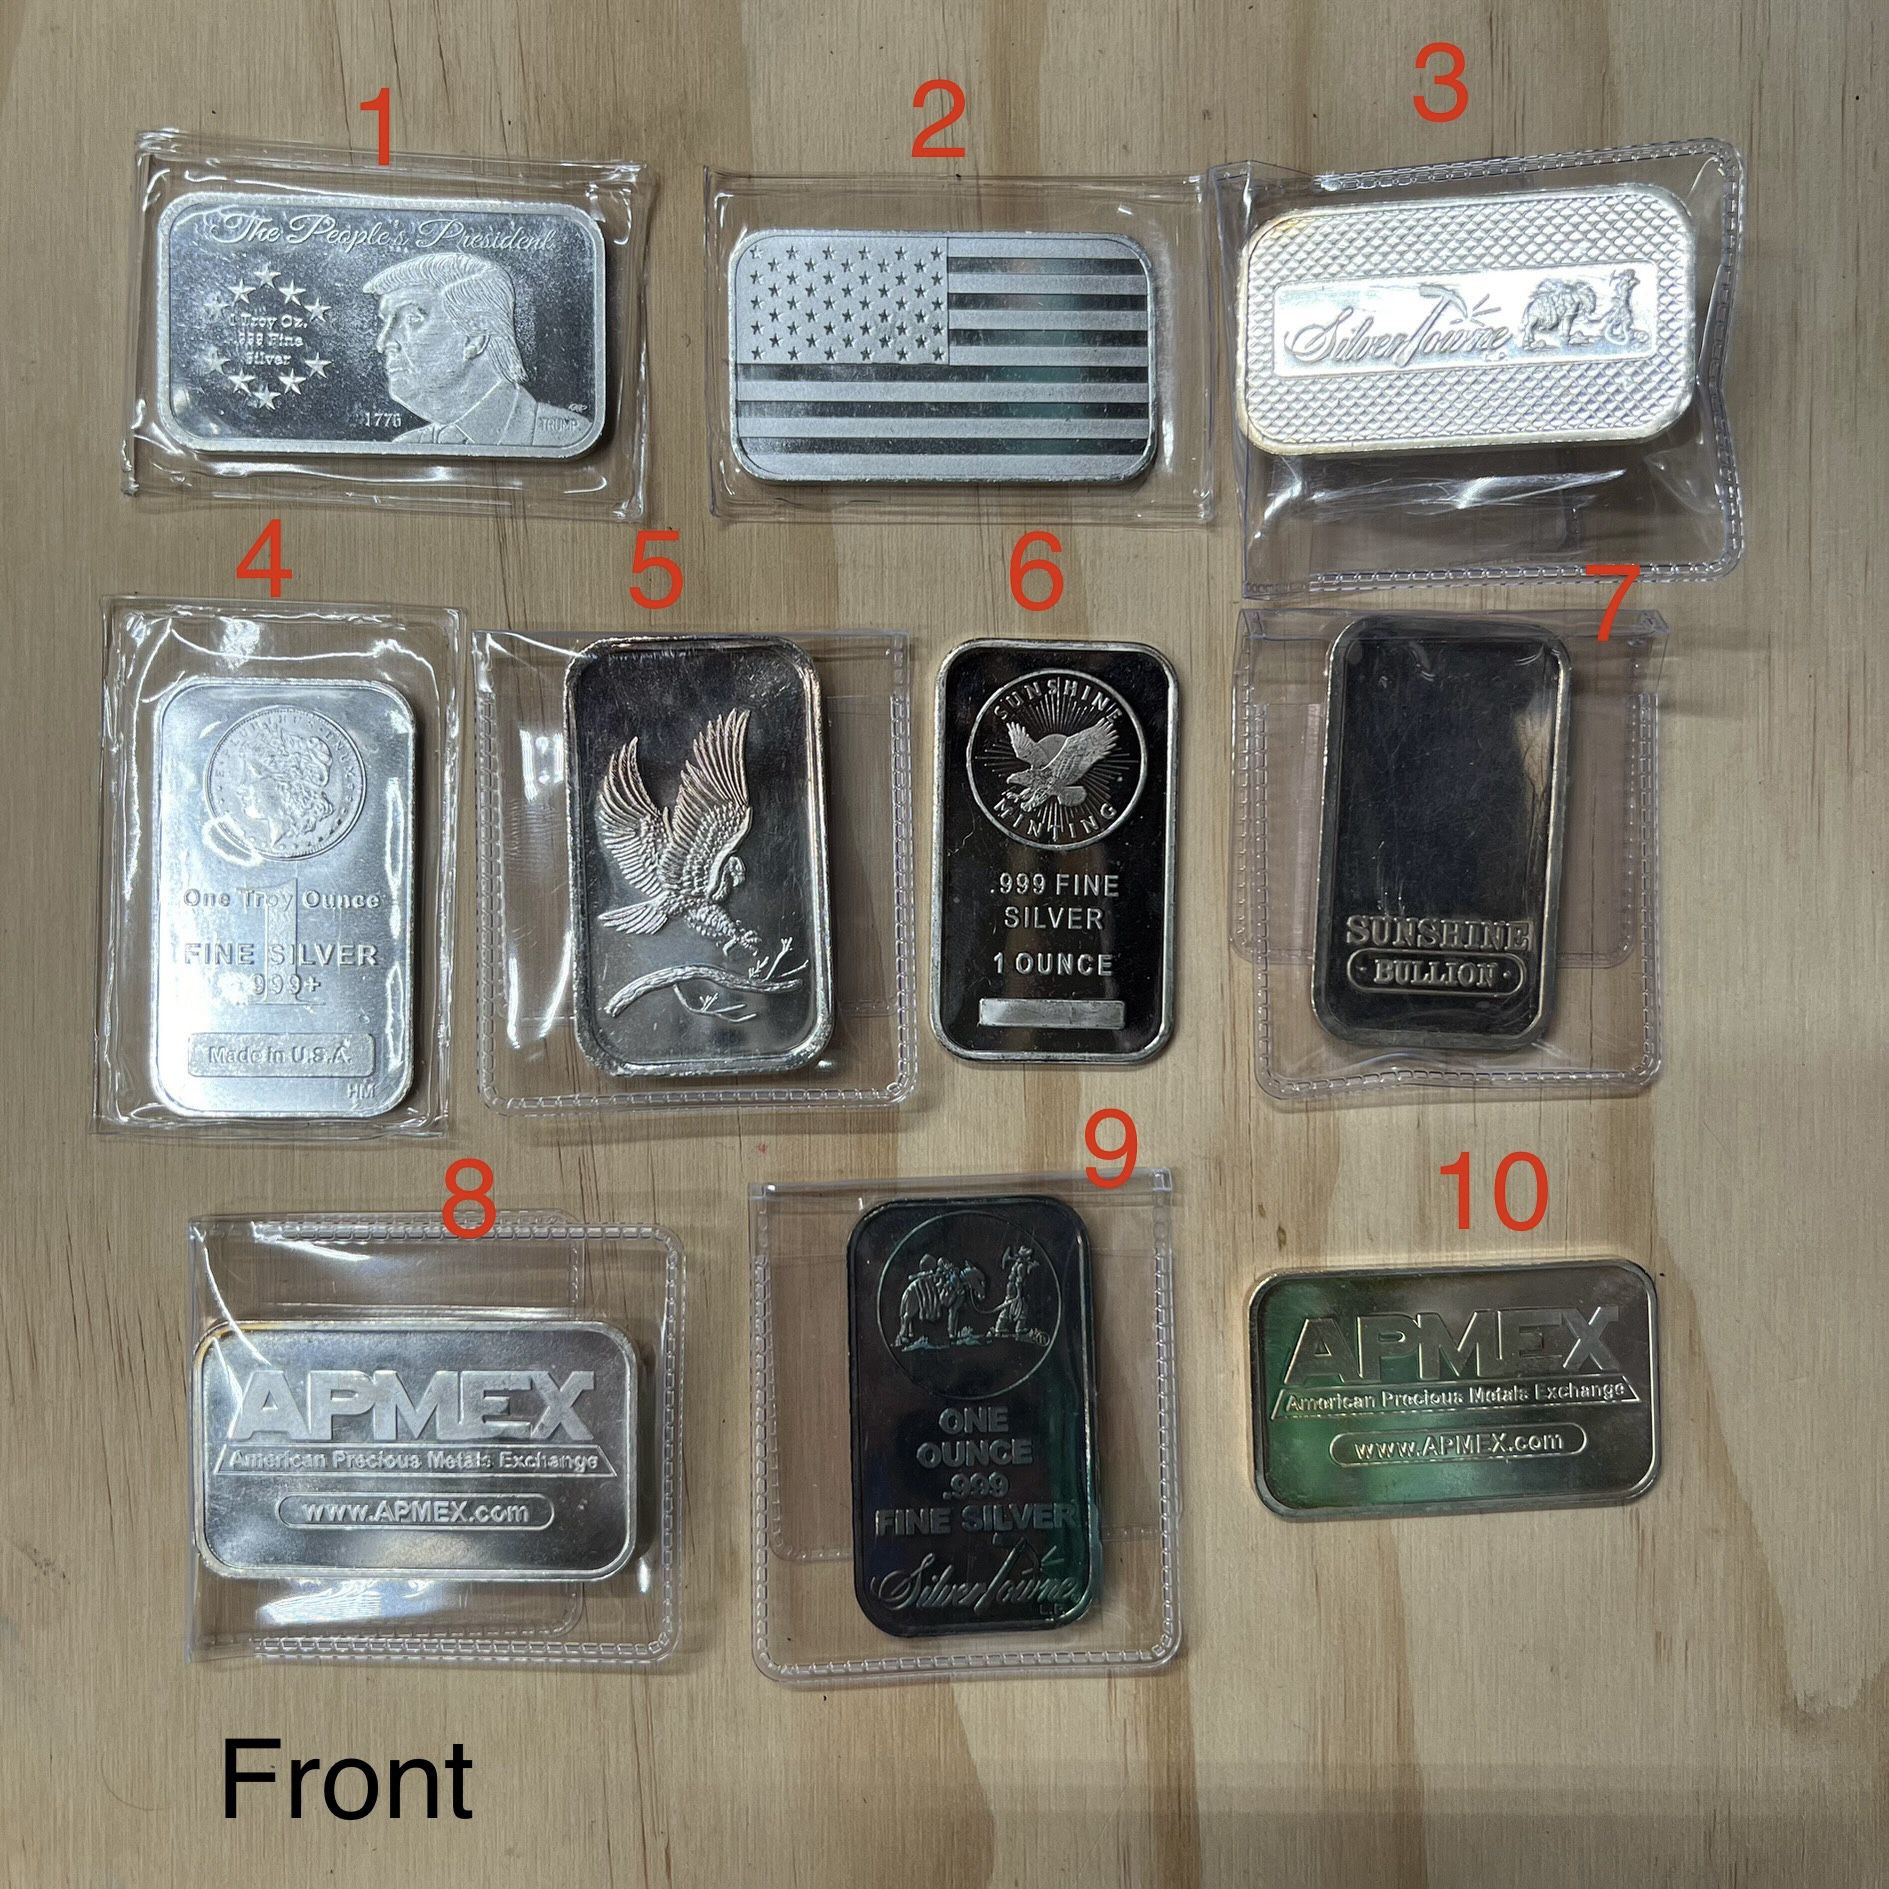 1 Tory Ounce .999 Fine Silver Bars! Take Your Pick $35ea